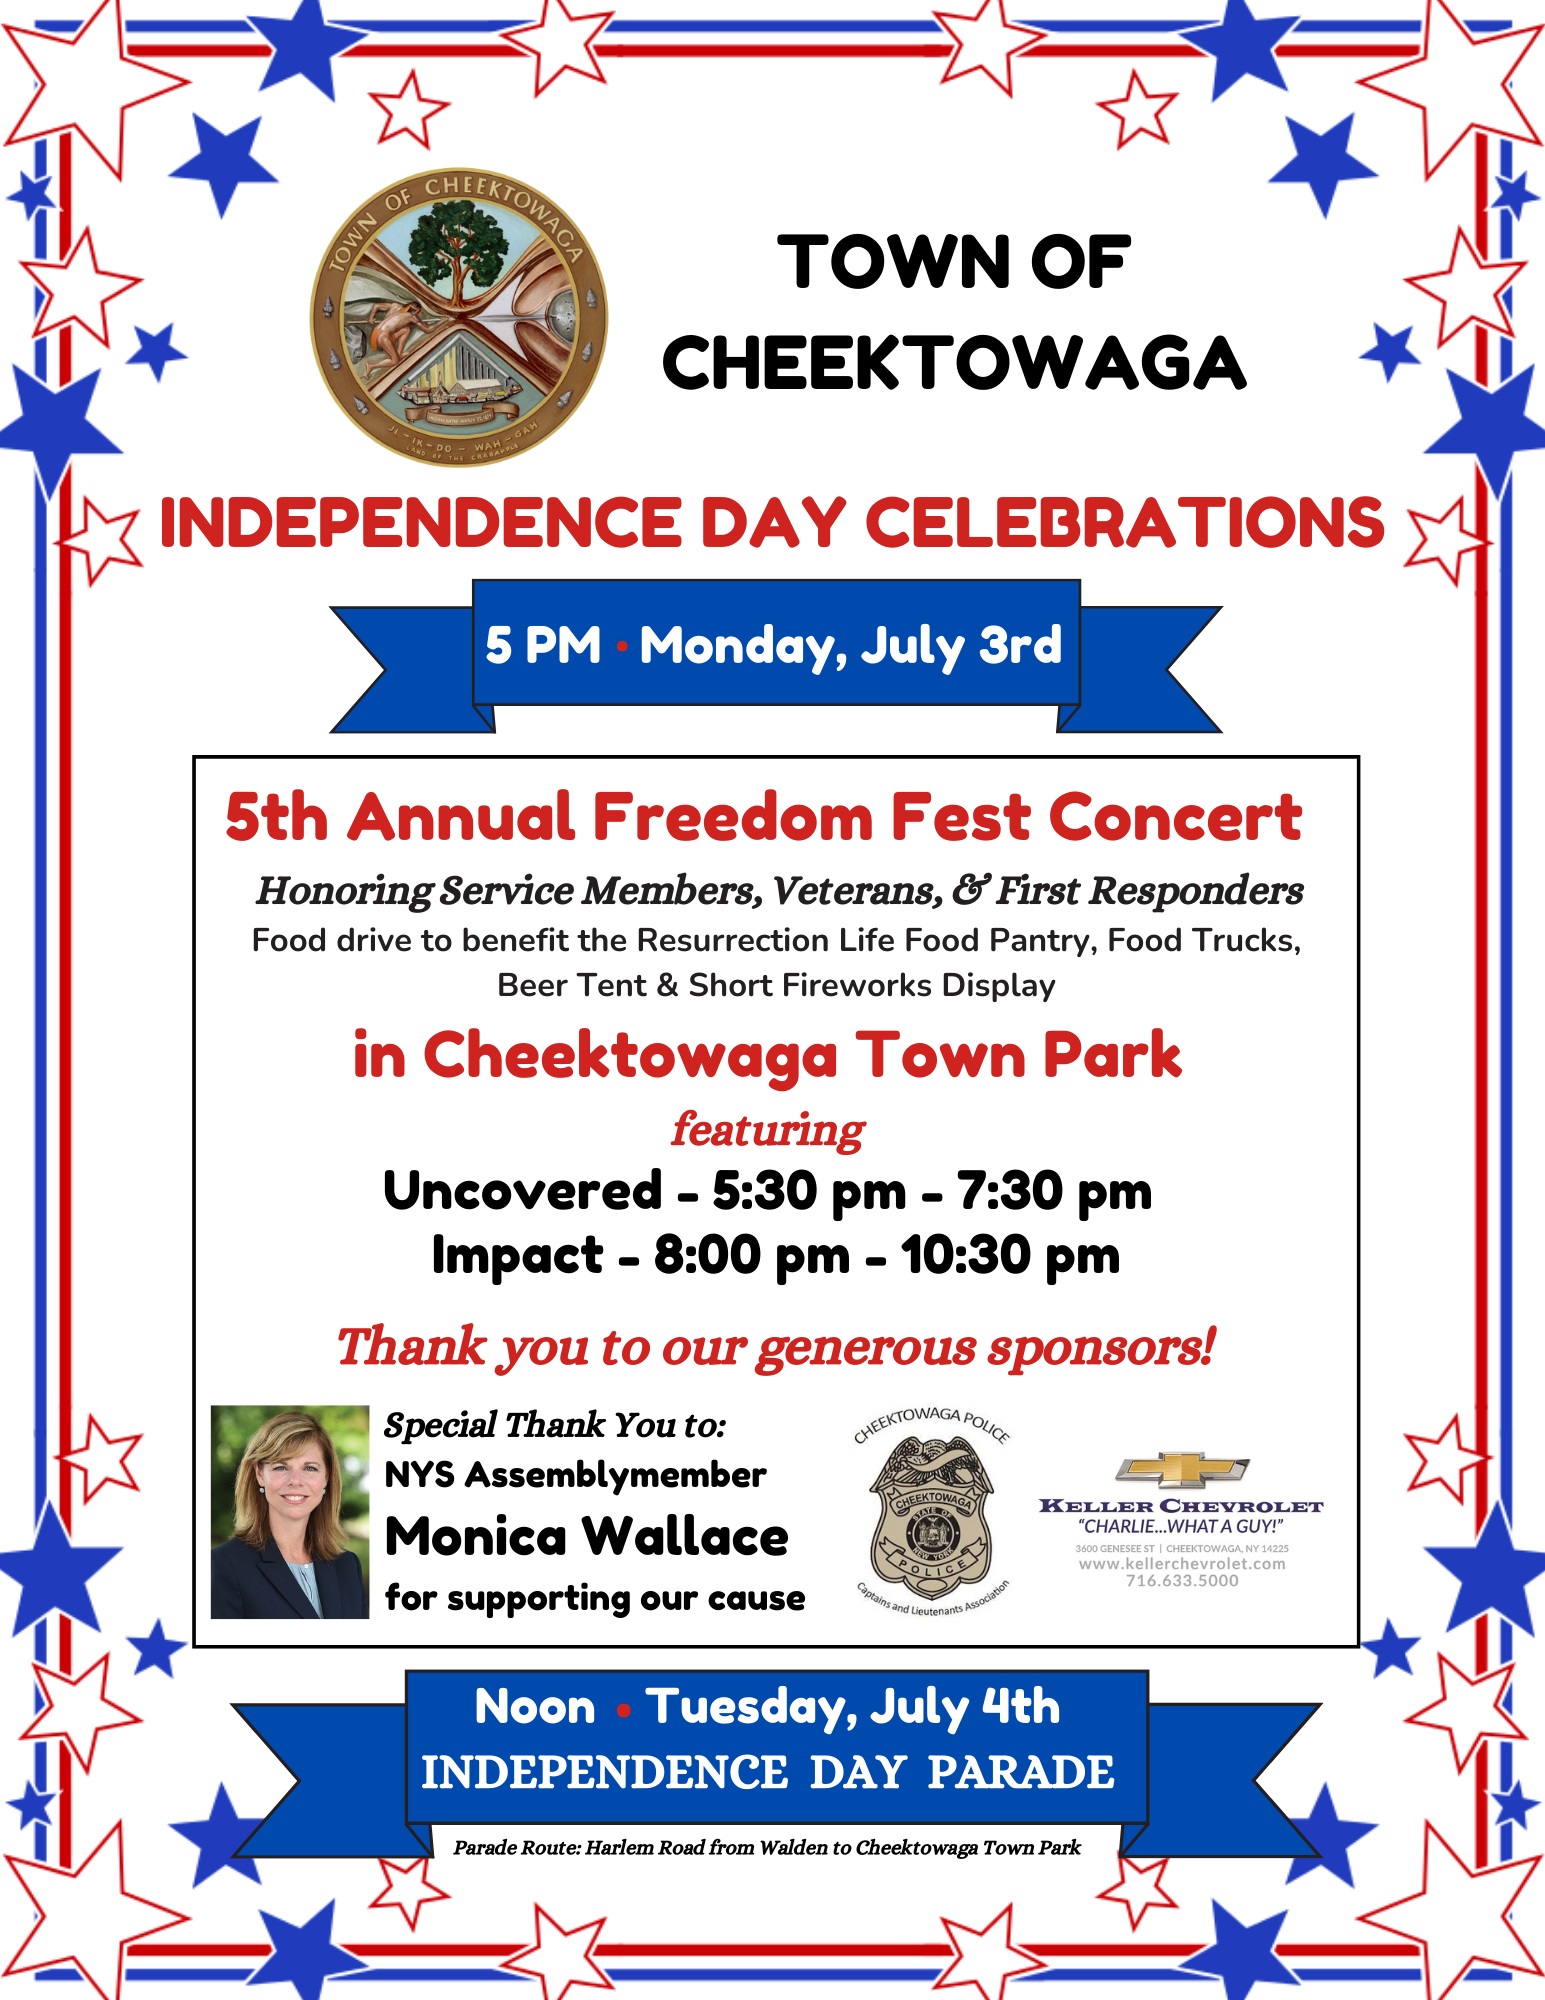 Cheektowaga Independence Day Parade Concert and Fireworks July 4